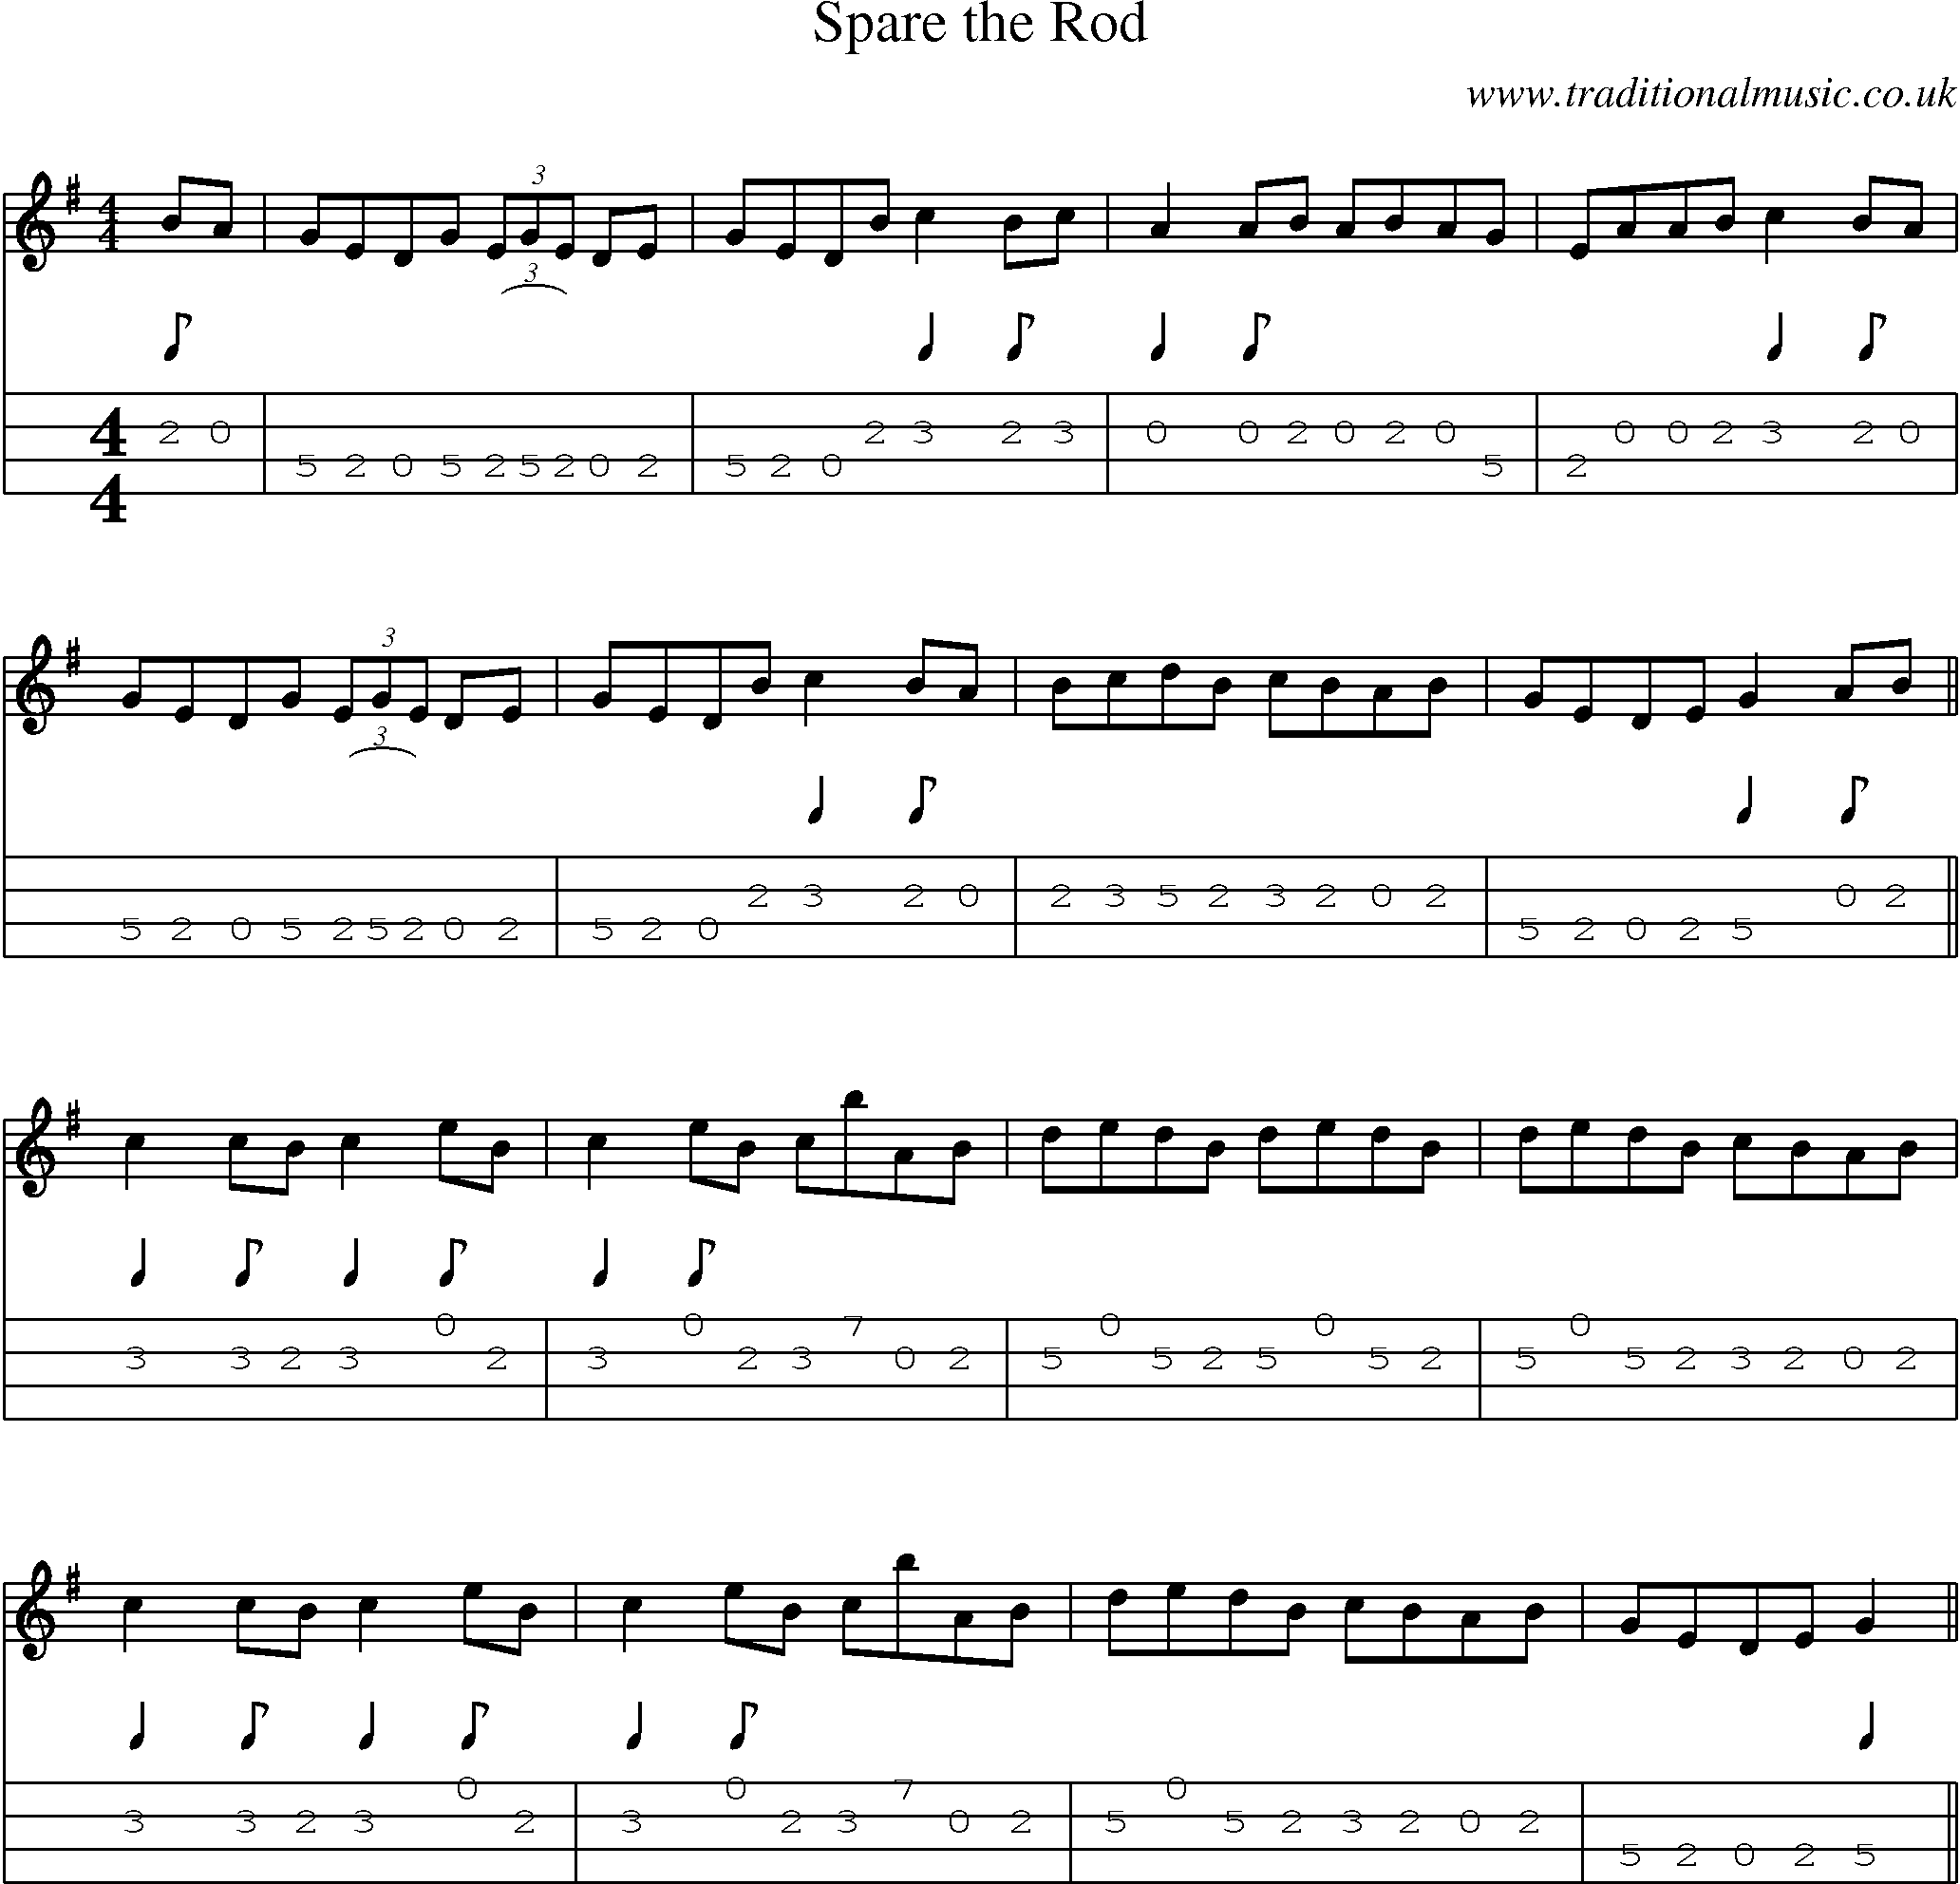 Music Score and Mandolin Tabs for Spare Rod